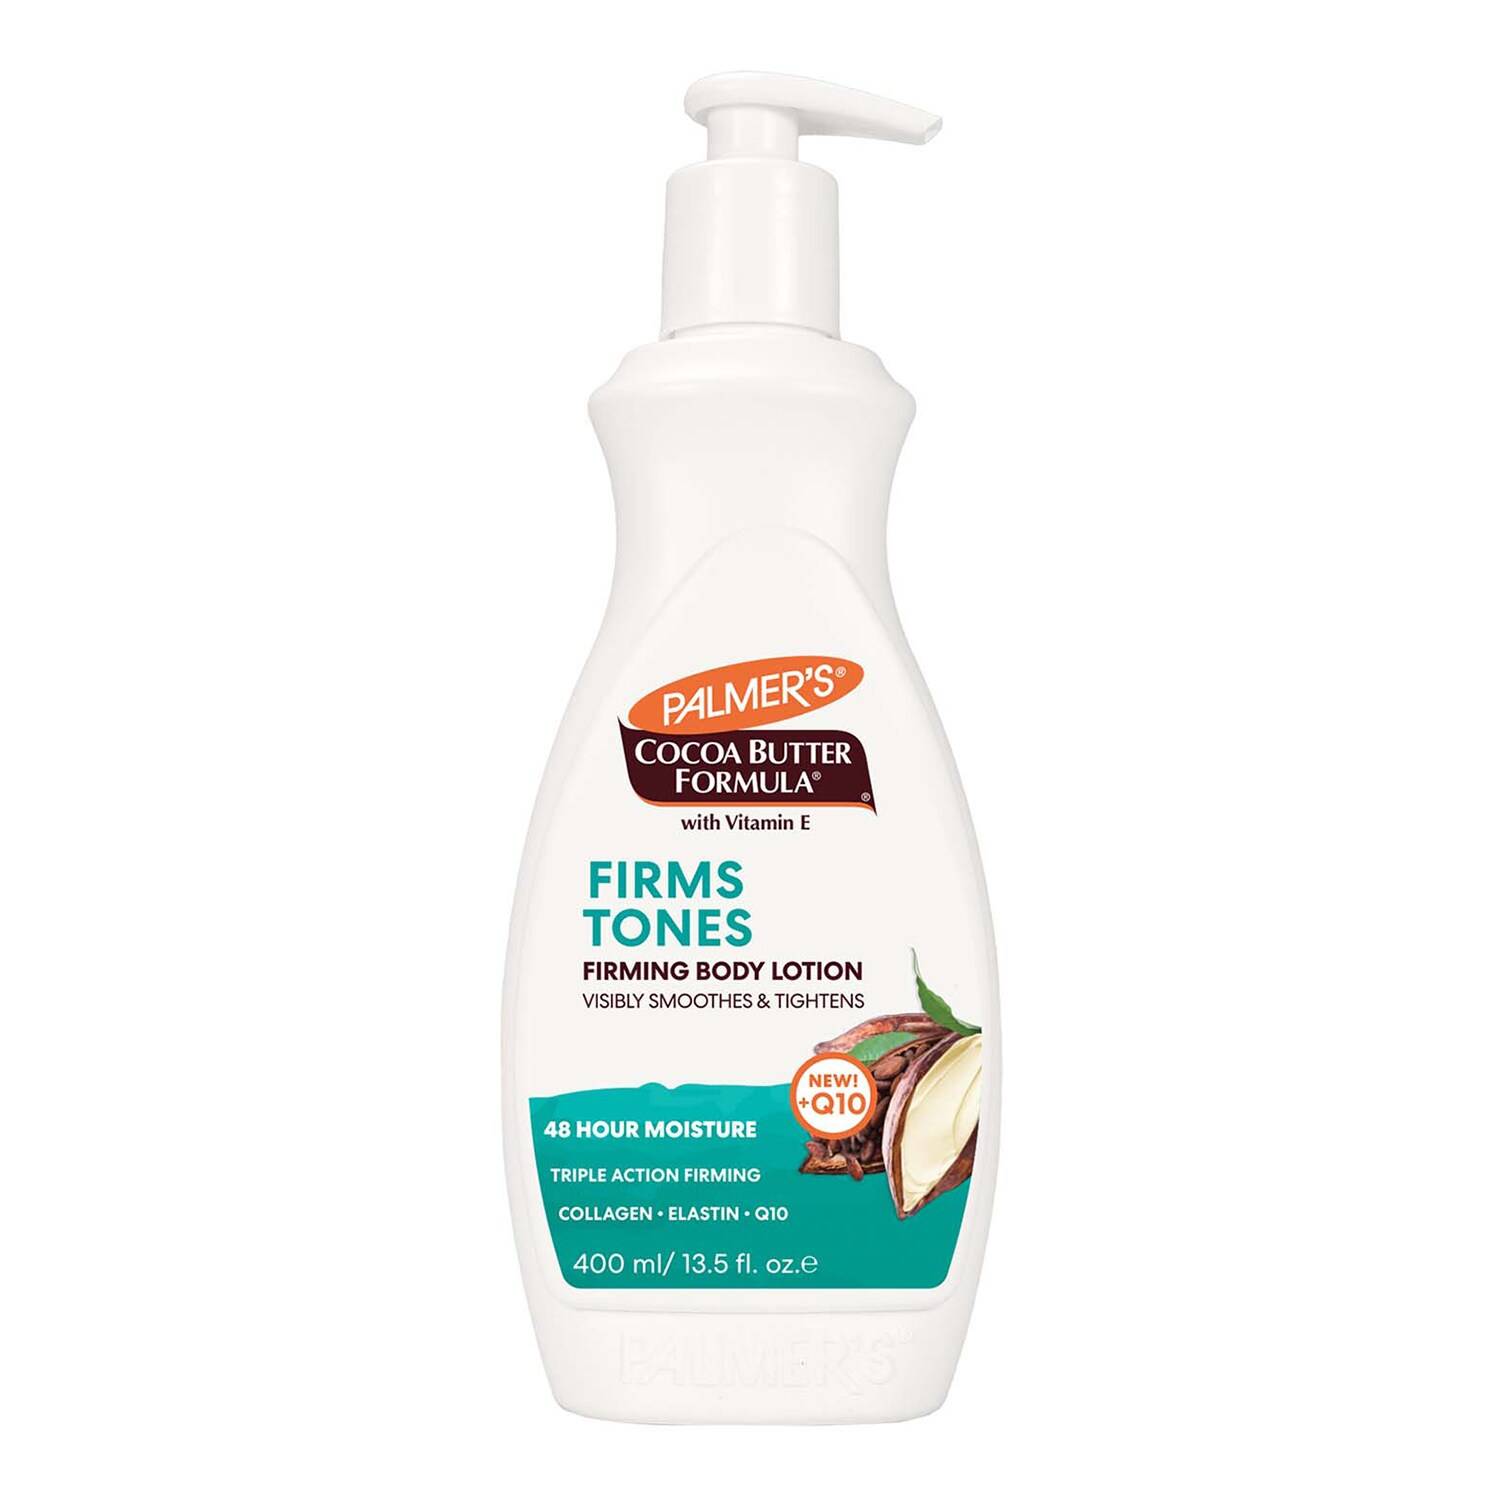 Palmer's Cocoa Butter Formula Firming Body Lotion 400Ml